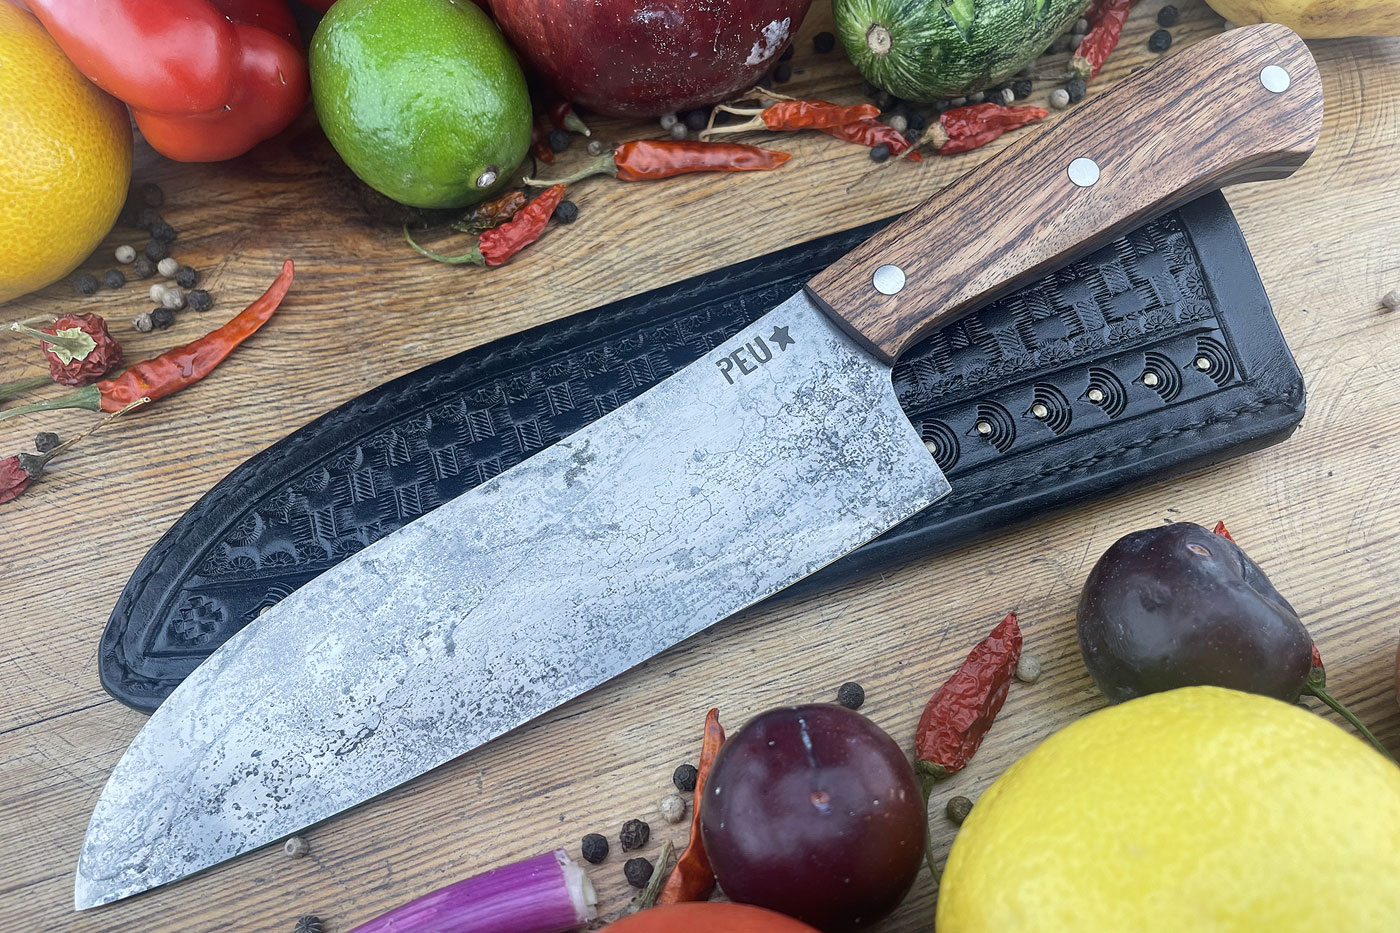 Chef's Knife (Santoku) with Urunday and O2 Carbon Steel